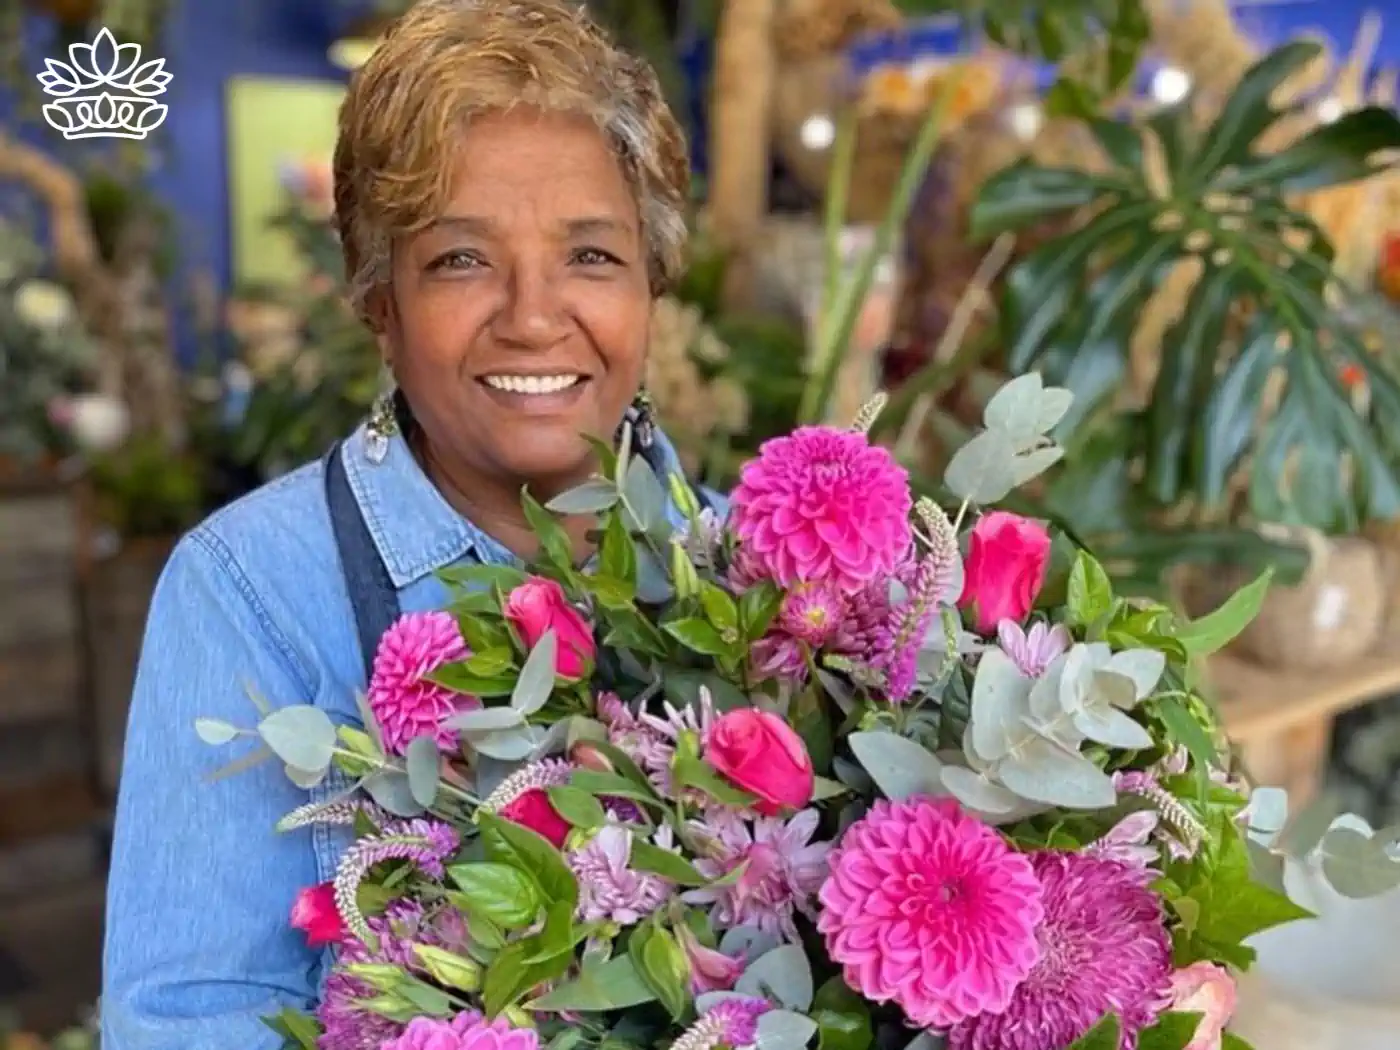 A joyful middle-aged sa florist, dressed in a blue denim shirt, holds a stunning bouquet of pink roses and dahlias, representing the vibrant life and special occasions catered by professional florists. The background showcases a well-stocked flower shop. Fabulous Flowers and Gifts.